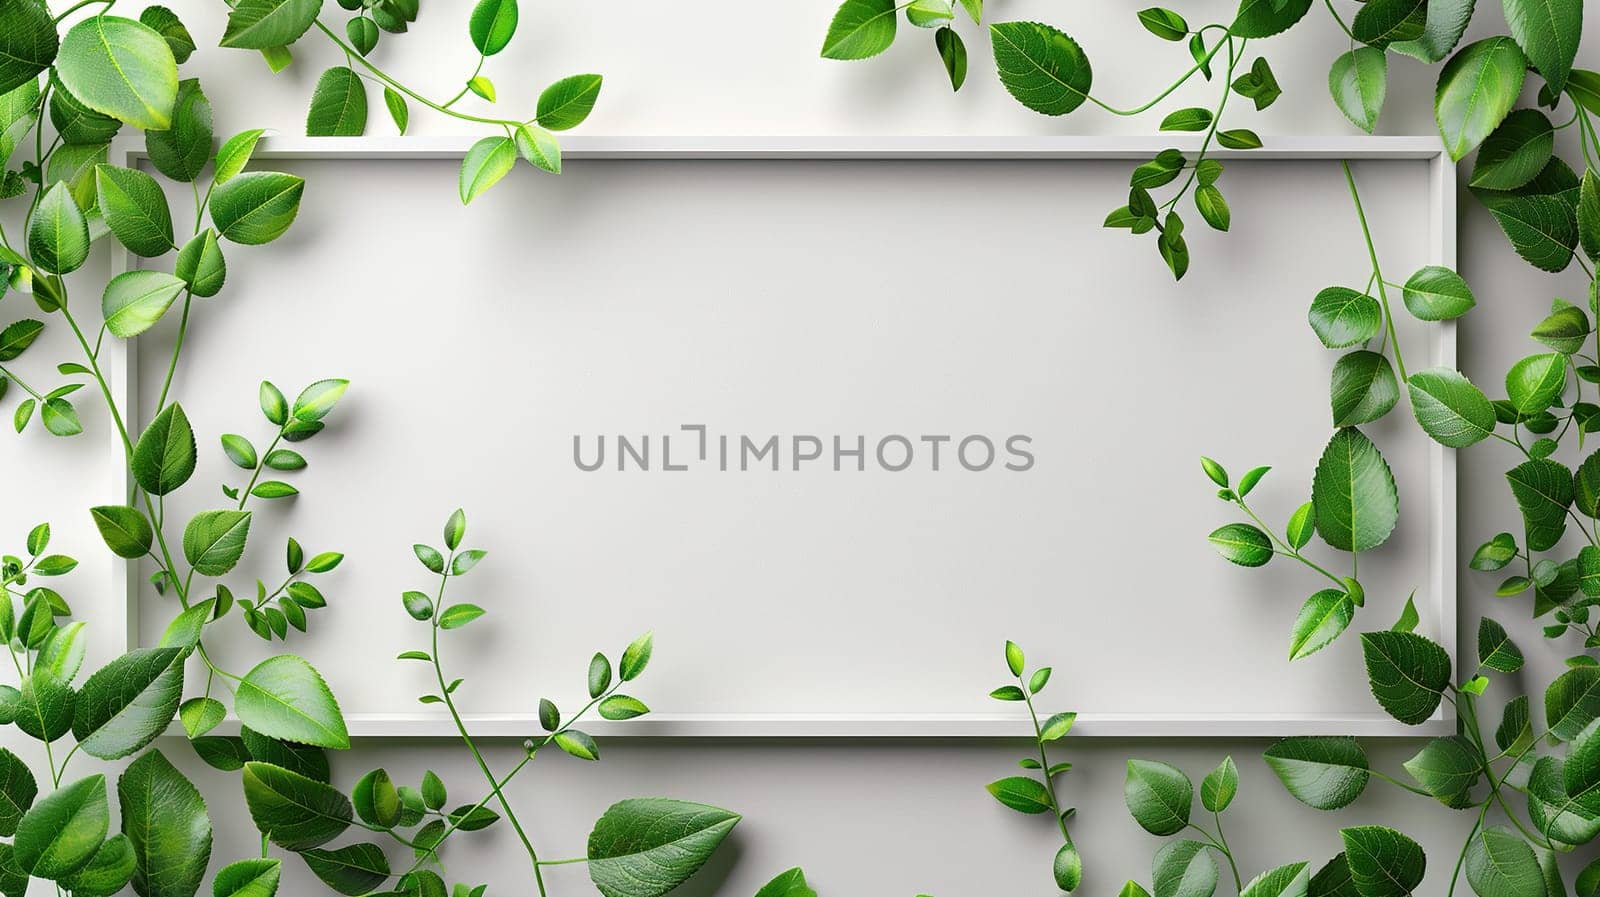 Blank white banner with microgreen frame.